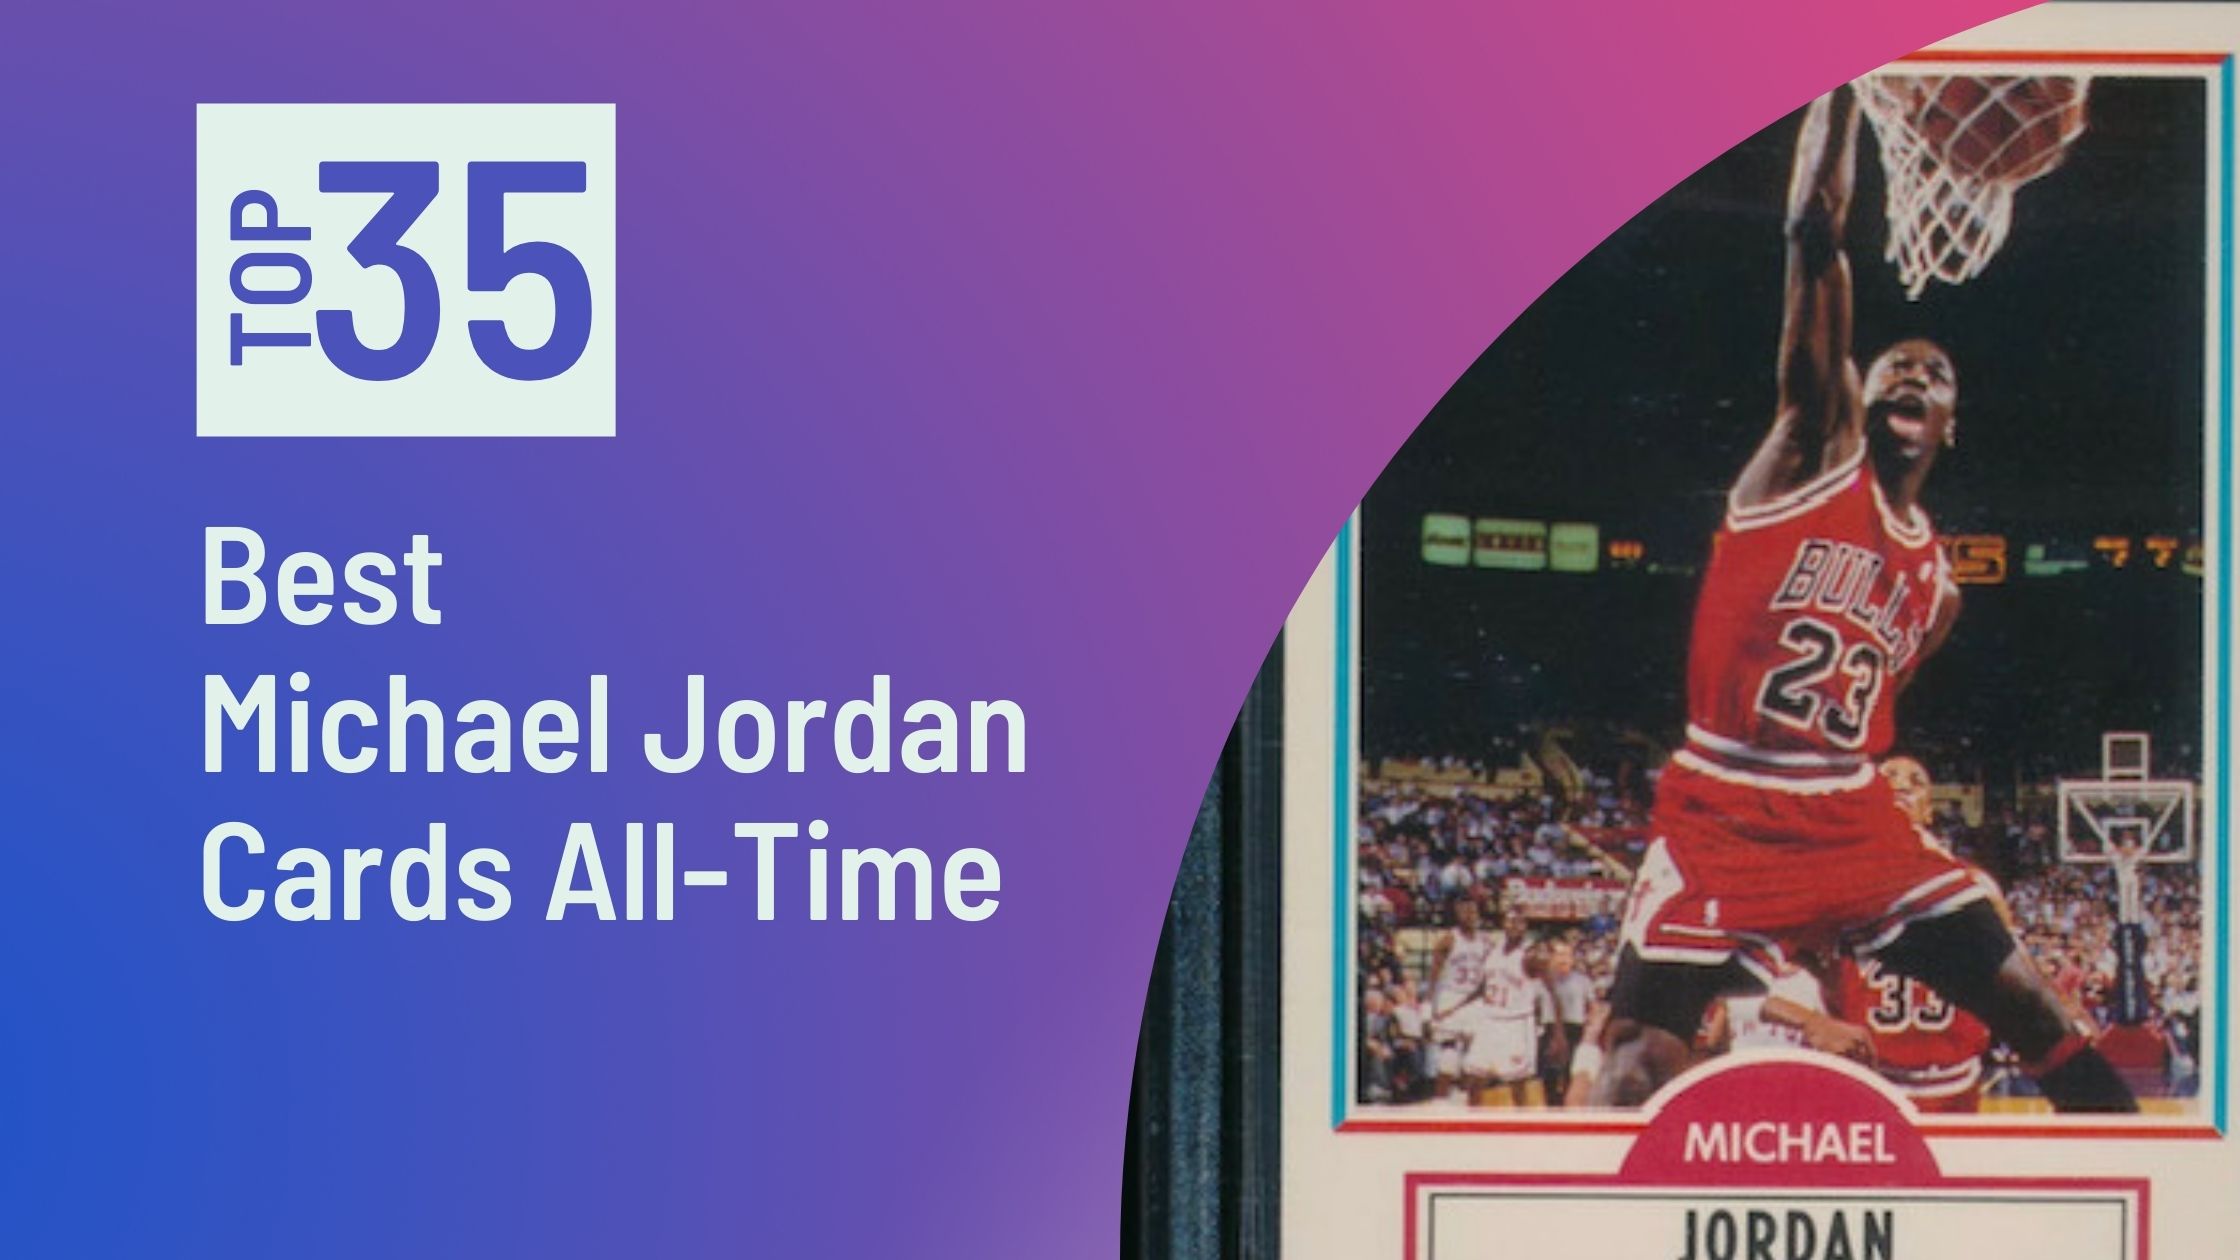 Featured Image for the Best Michael Jordan Cards of All-Time blog post